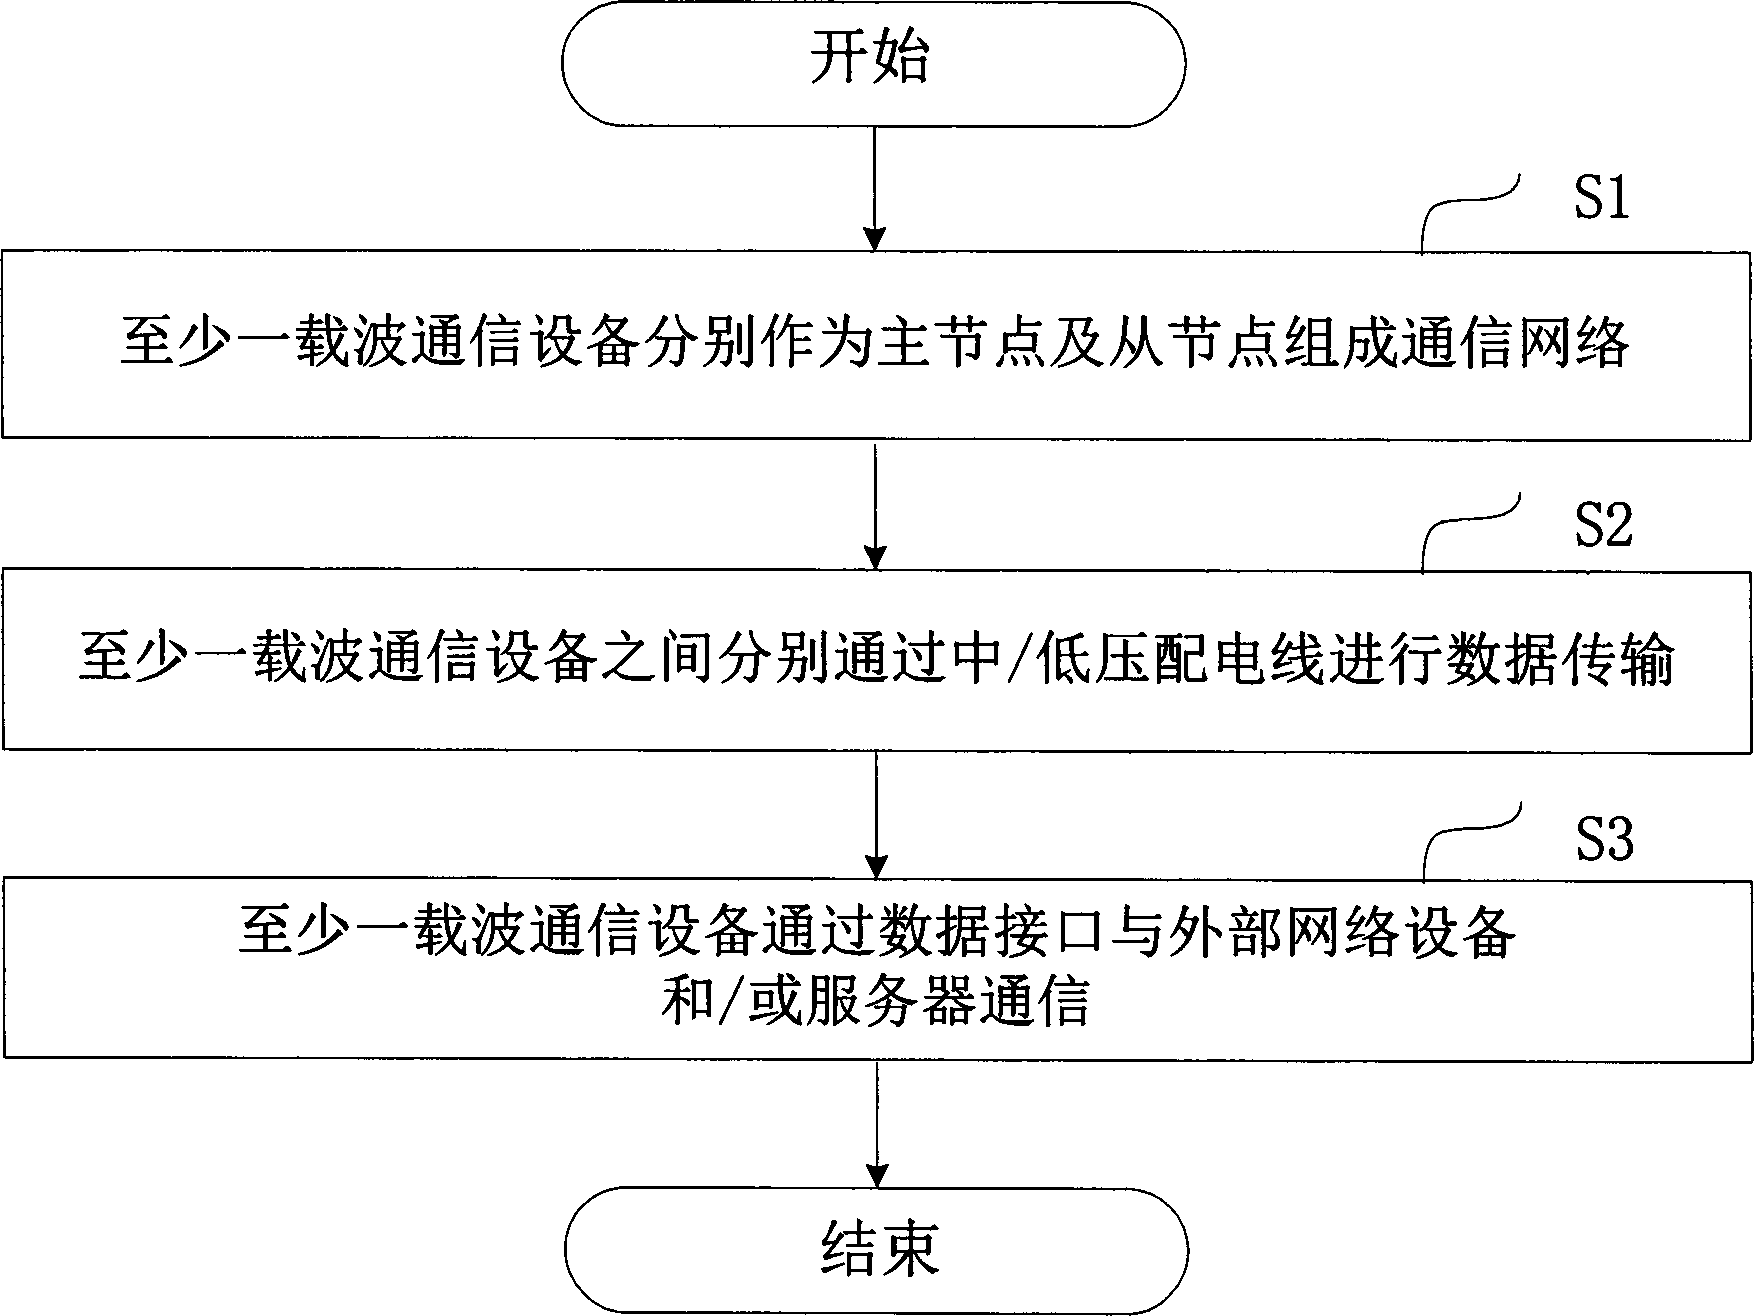 Carrier communication multi-service access platform system and method